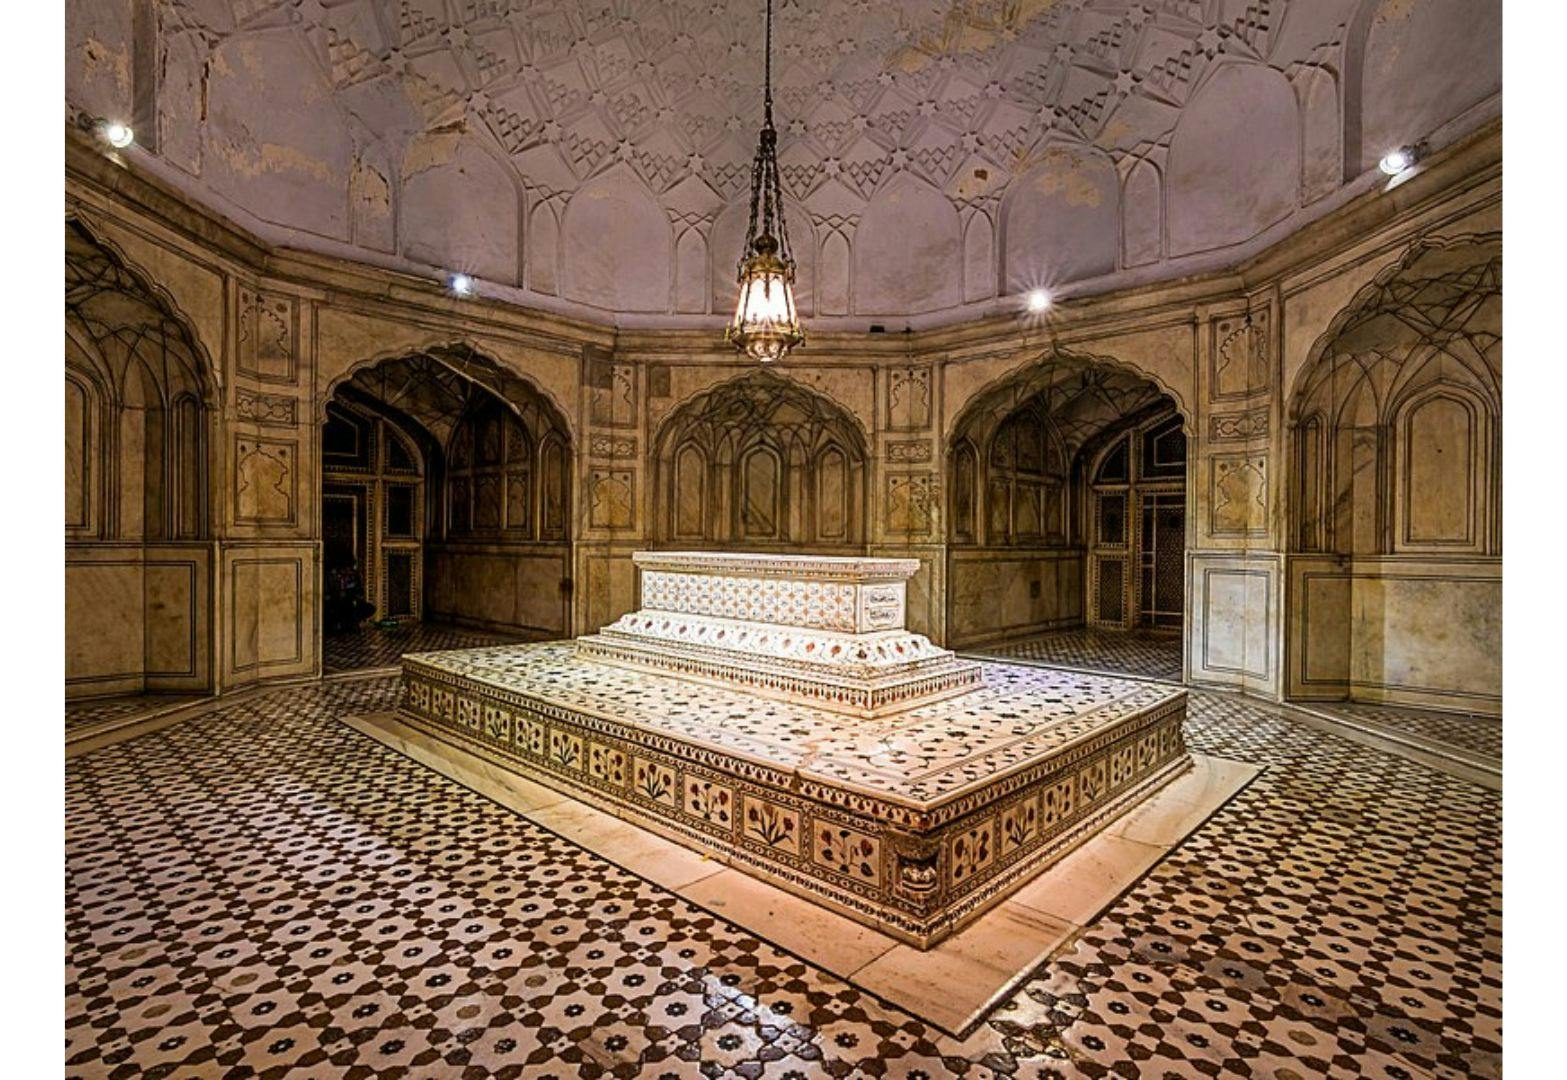 In the centre of the tomb is Emperor Jahangir’s grave, also decorated with marble inlay | Wikimedia Commons